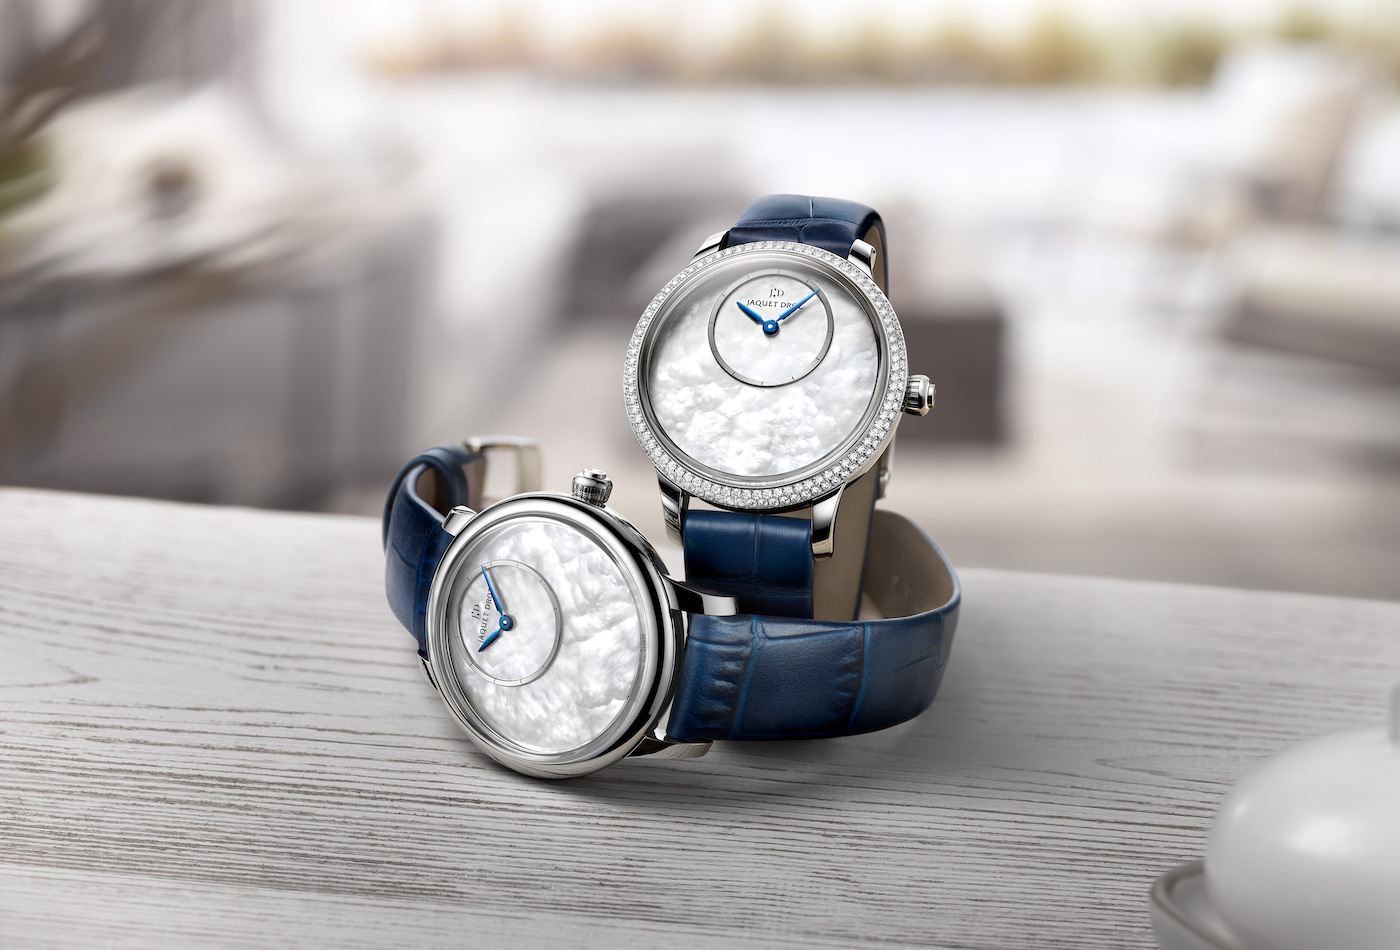 Jaquet-Droz-Petite-Heure-Minute-Mother-Of-Pearl-Watch